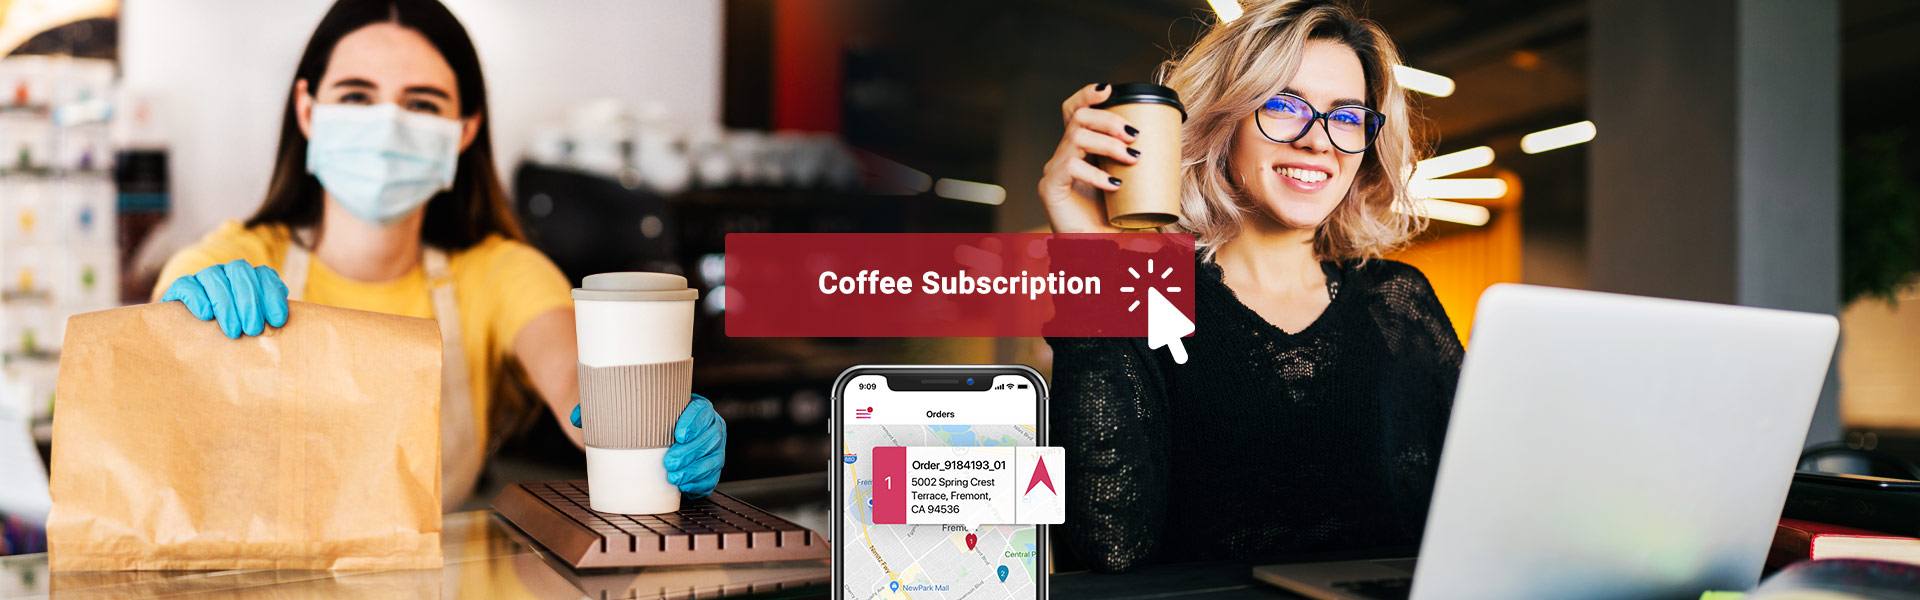 You already have Netflix, how about a coffee subscription to go along?